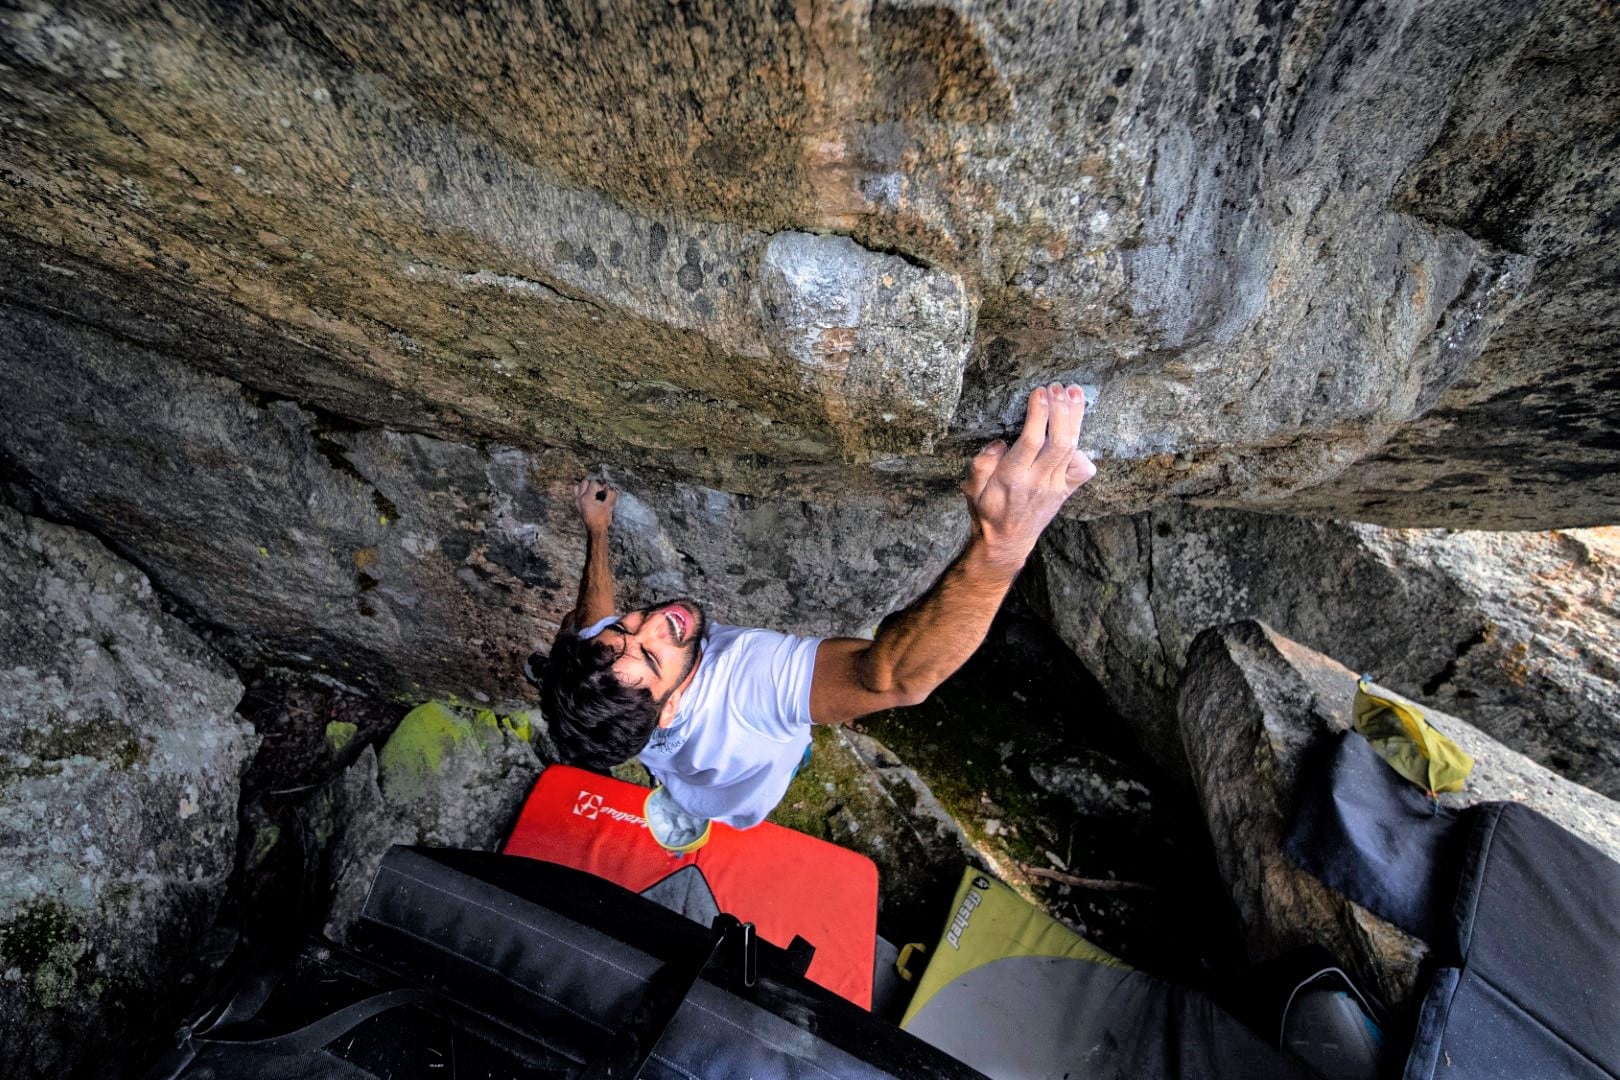 Local pro climbers raise awareness of racism and violence